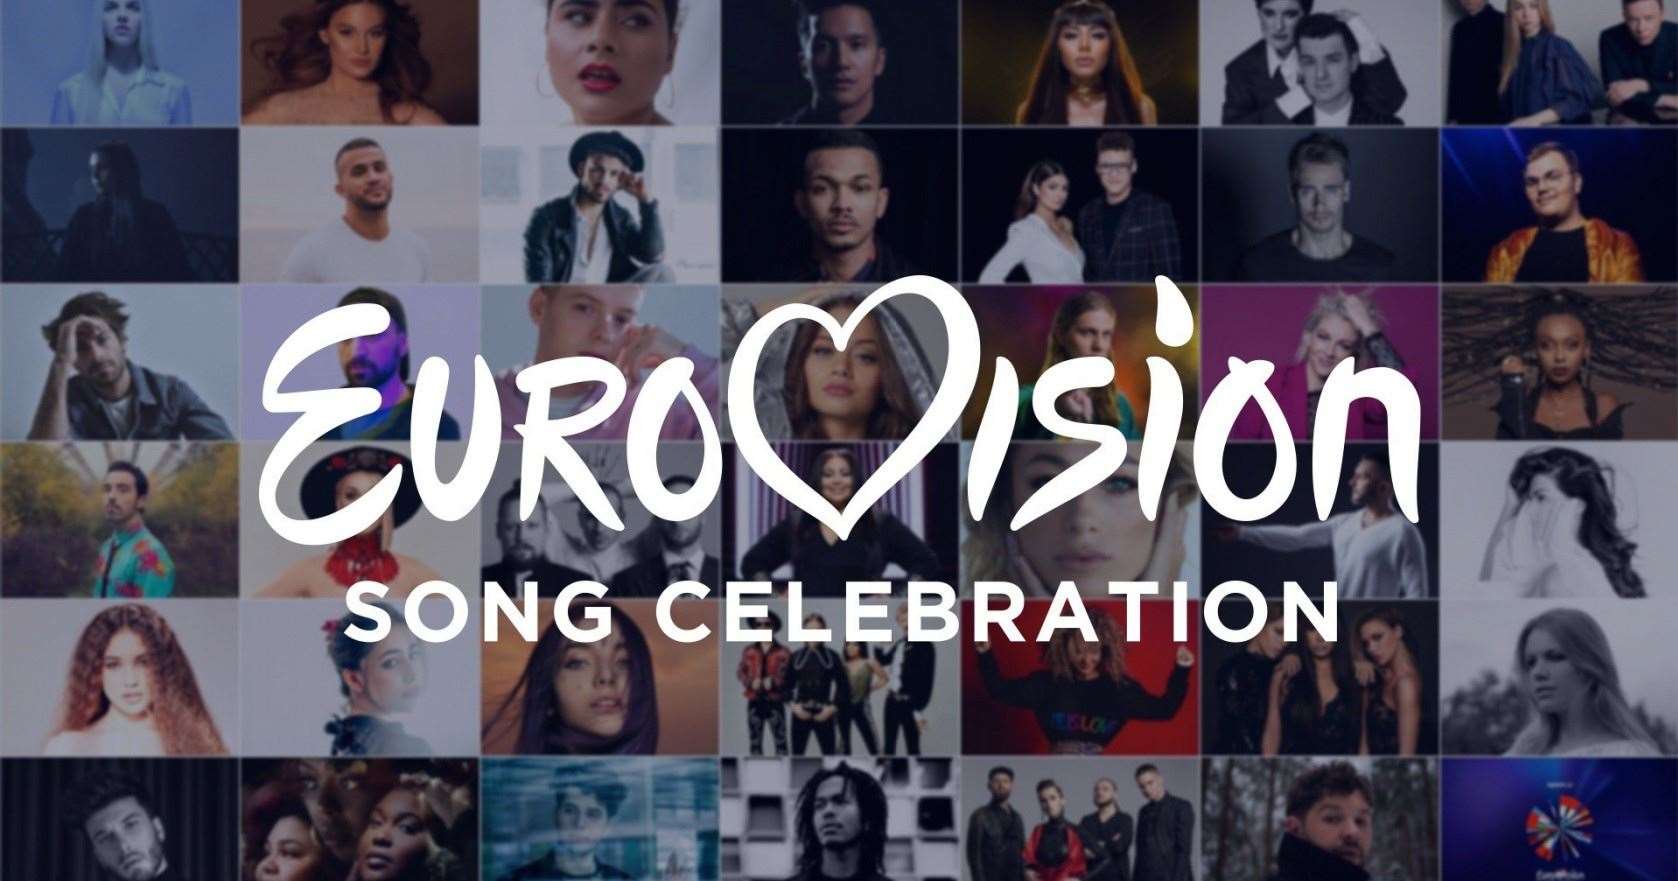 Eurovision is a song celebration this year instead of a contest